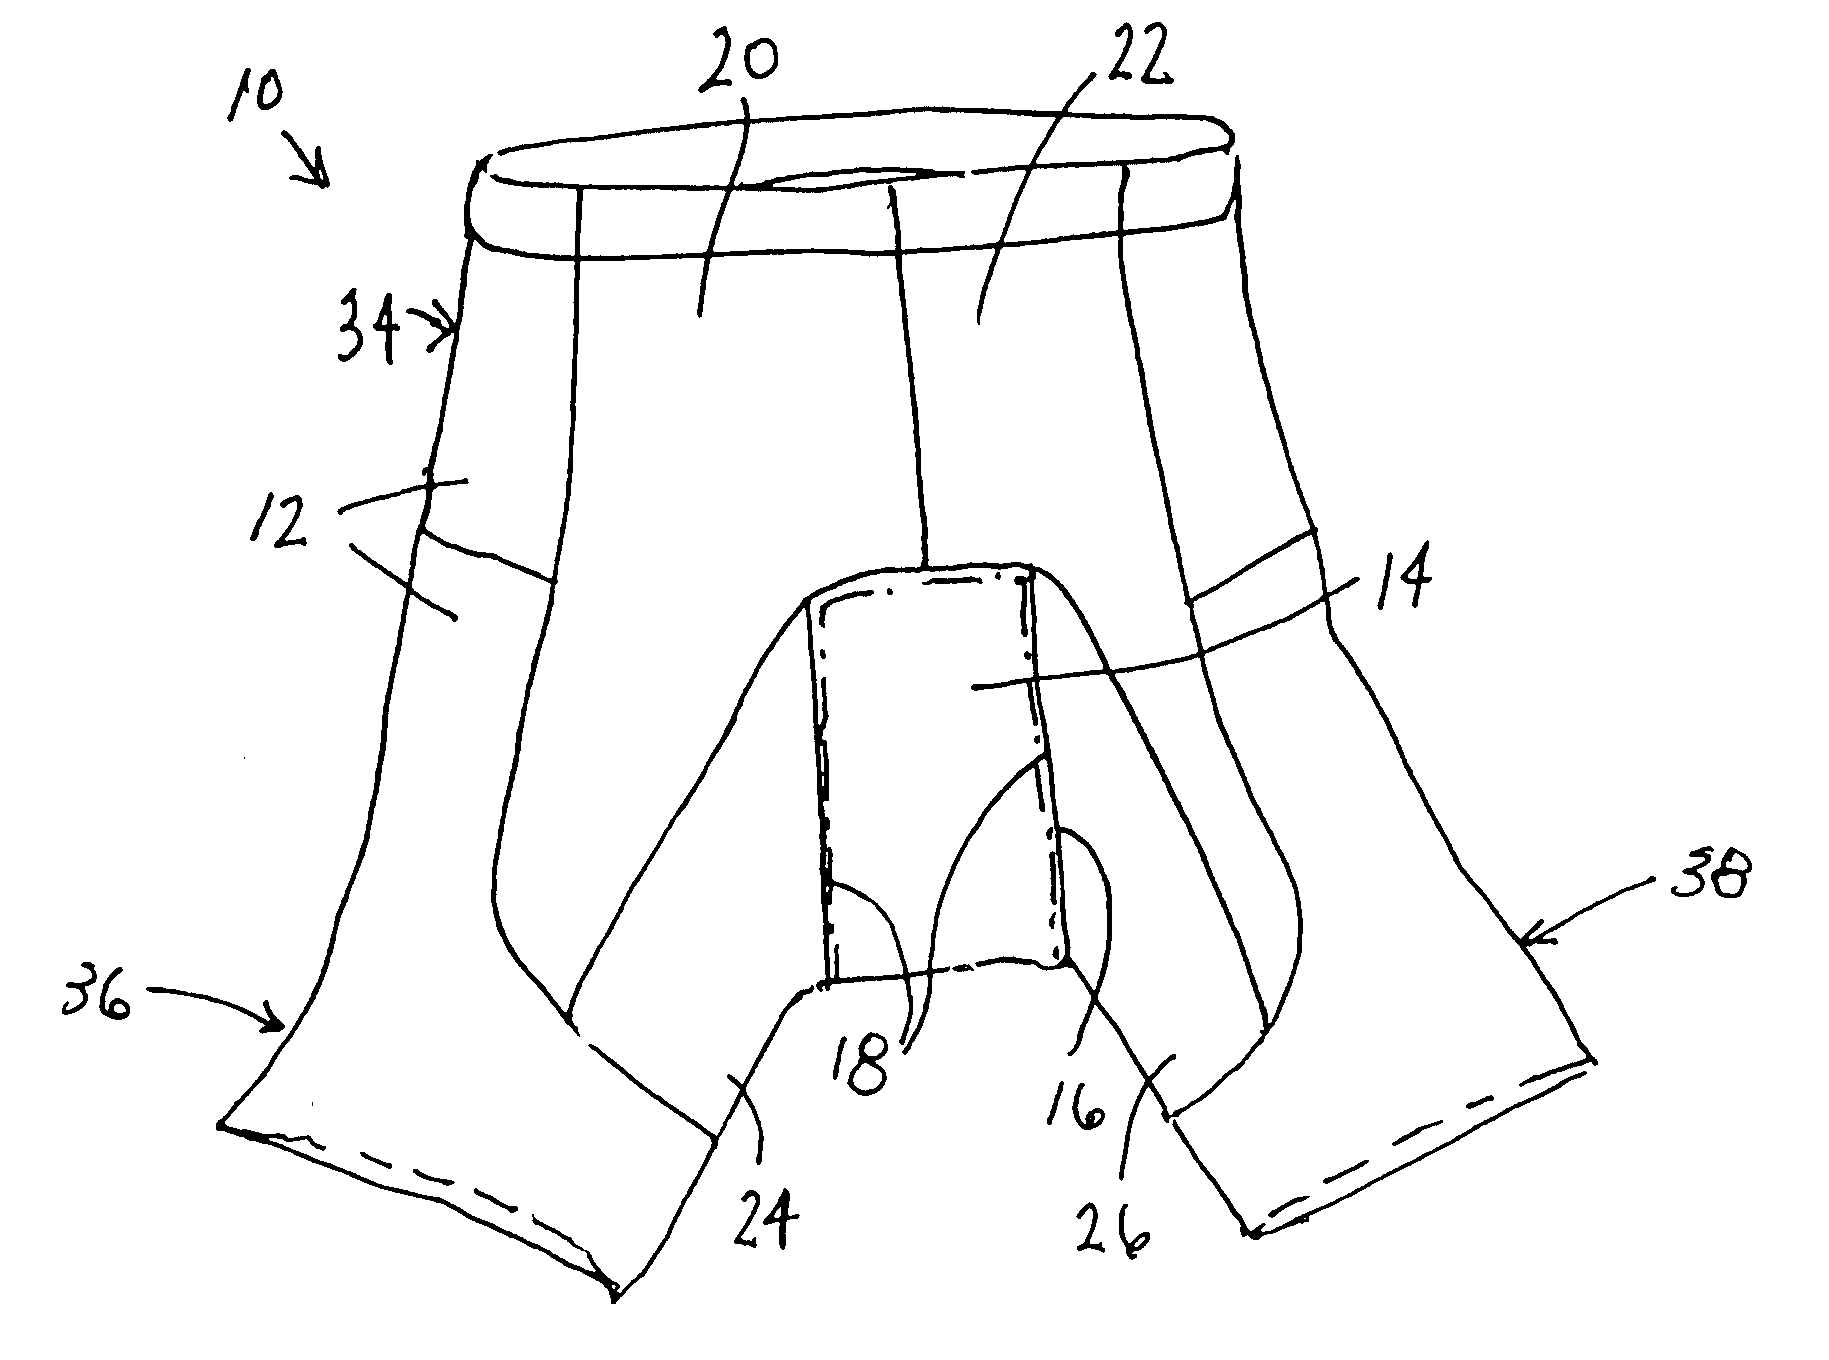 Cycling shorts and associated method of manufacture